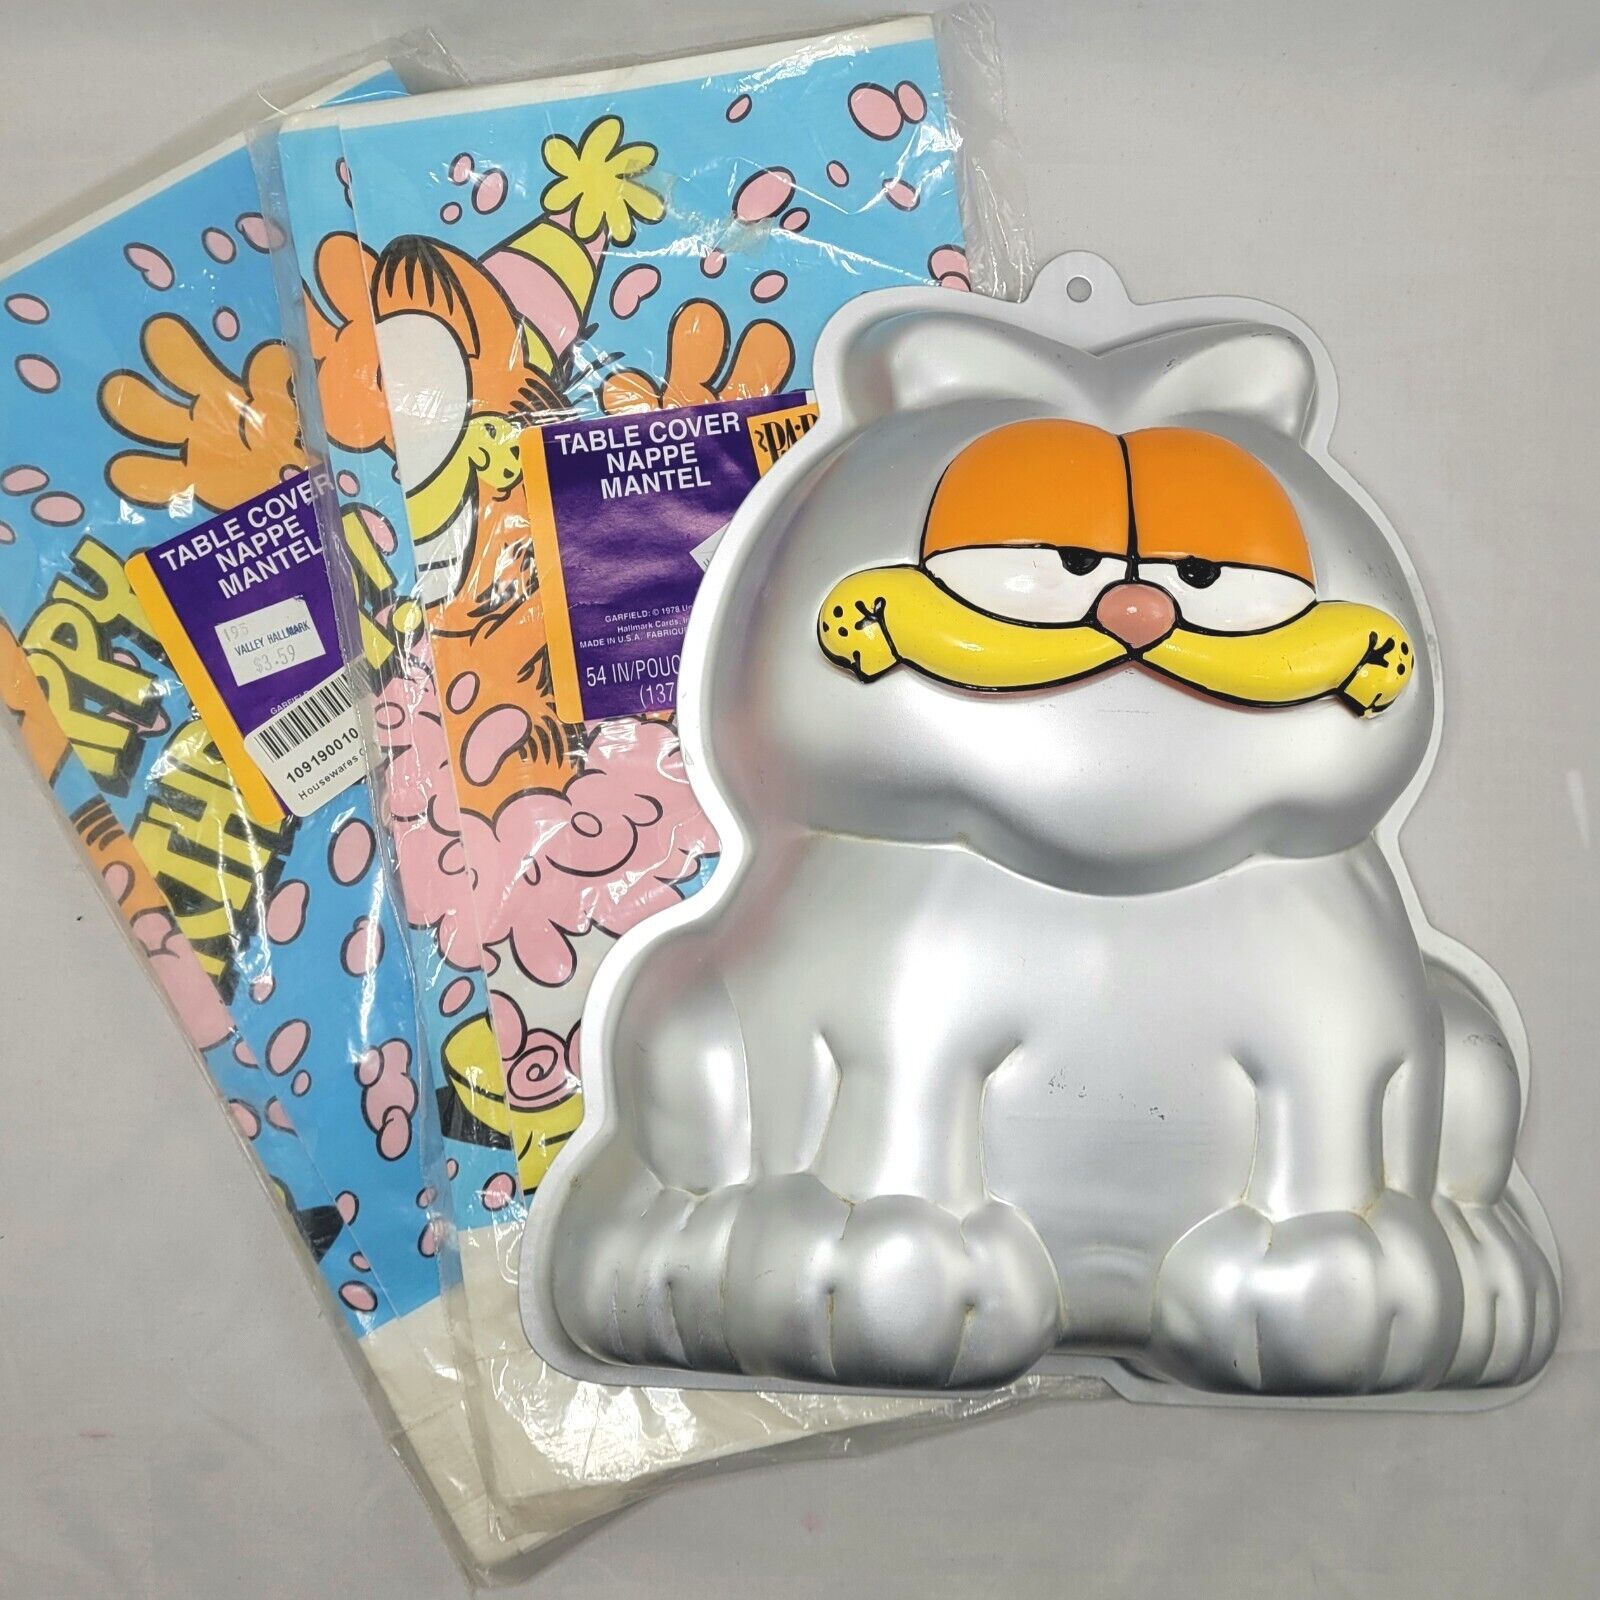 RARE Vintage 1978 Garfield Wilton Cake Pan W/FACE + Two 1978 Paper Tablecloths